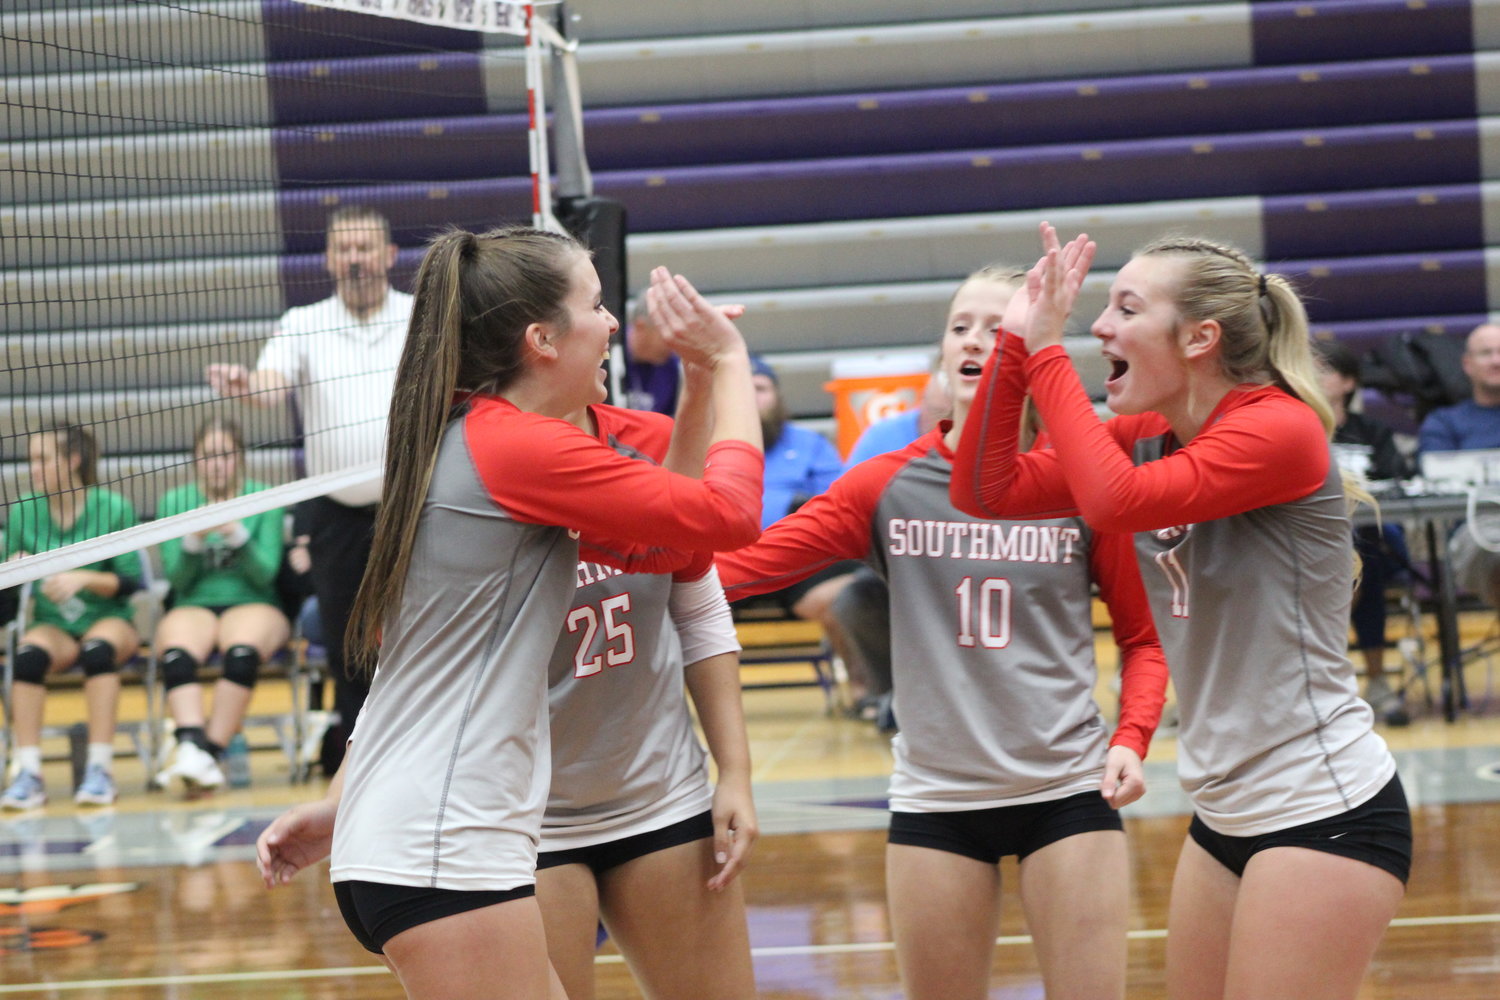 Southmont’s Chelsea Veatch, Mallory Mason (11), and DeLorean Mason (10) celebrate Veatch’s kill during their 3-0 sweep of Cloverdale in their sectional opener on Tuesday.